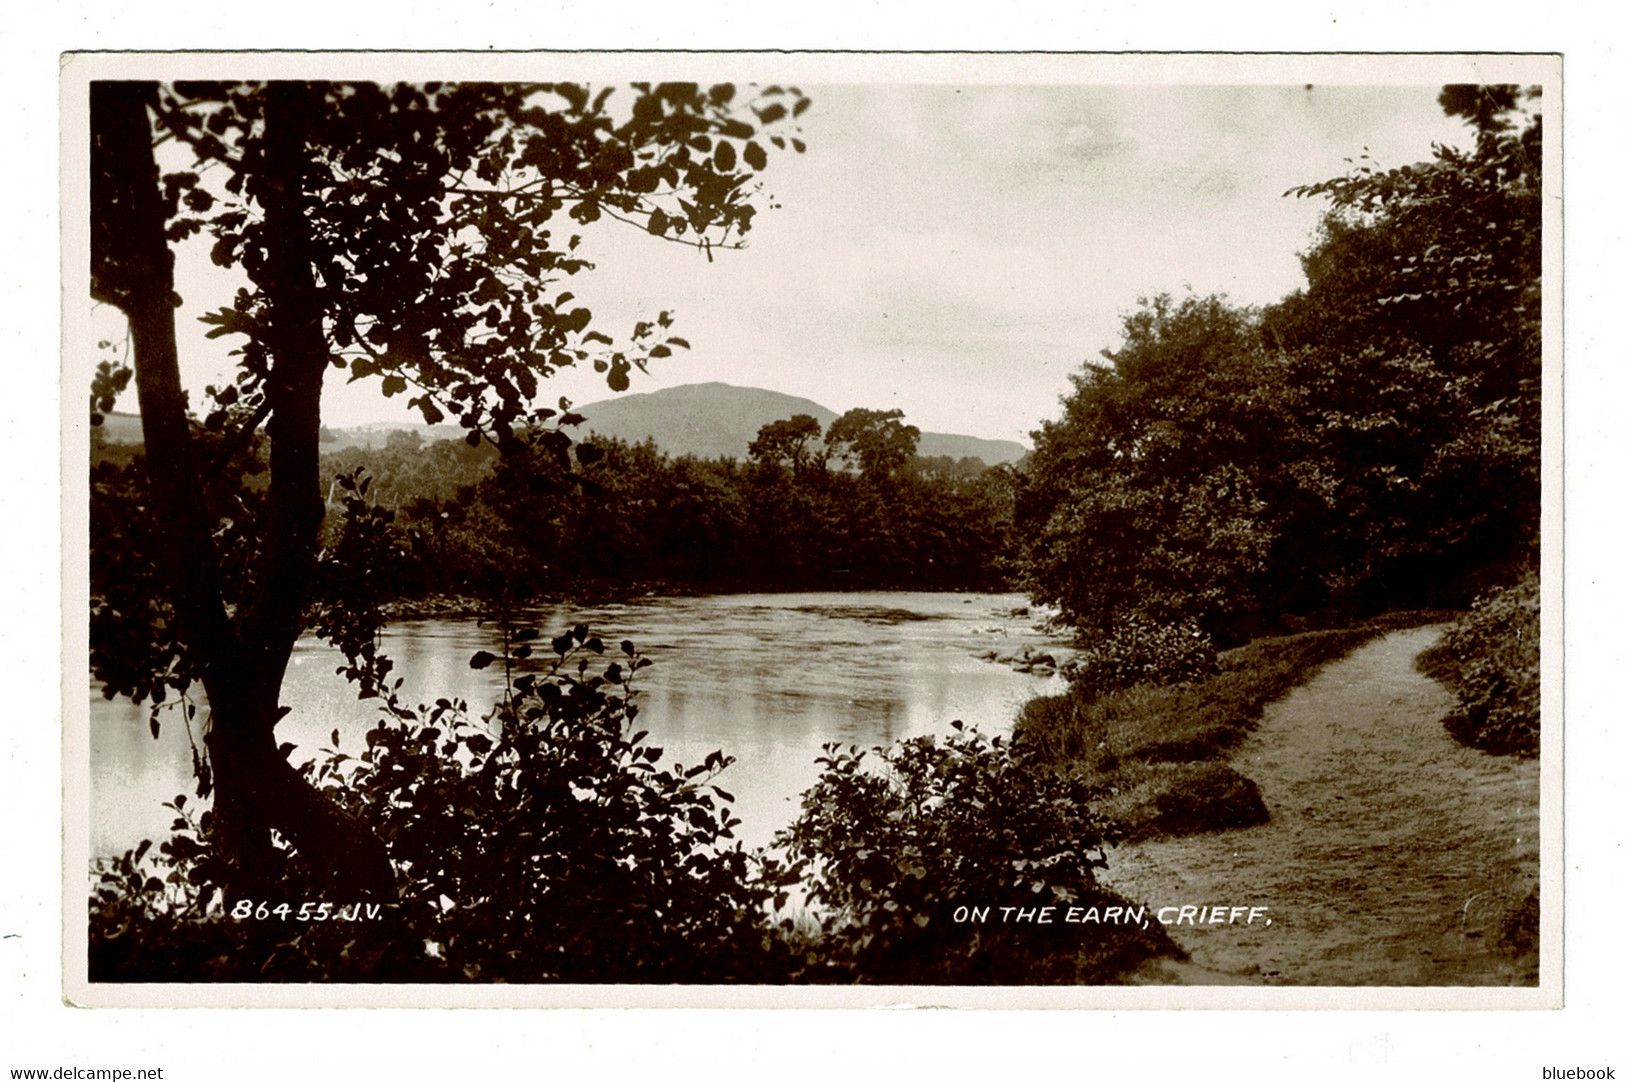 Ref 1404 - Real Photo Postcard - On The Earn Crieff - Perthshire Scotland - Perthshire